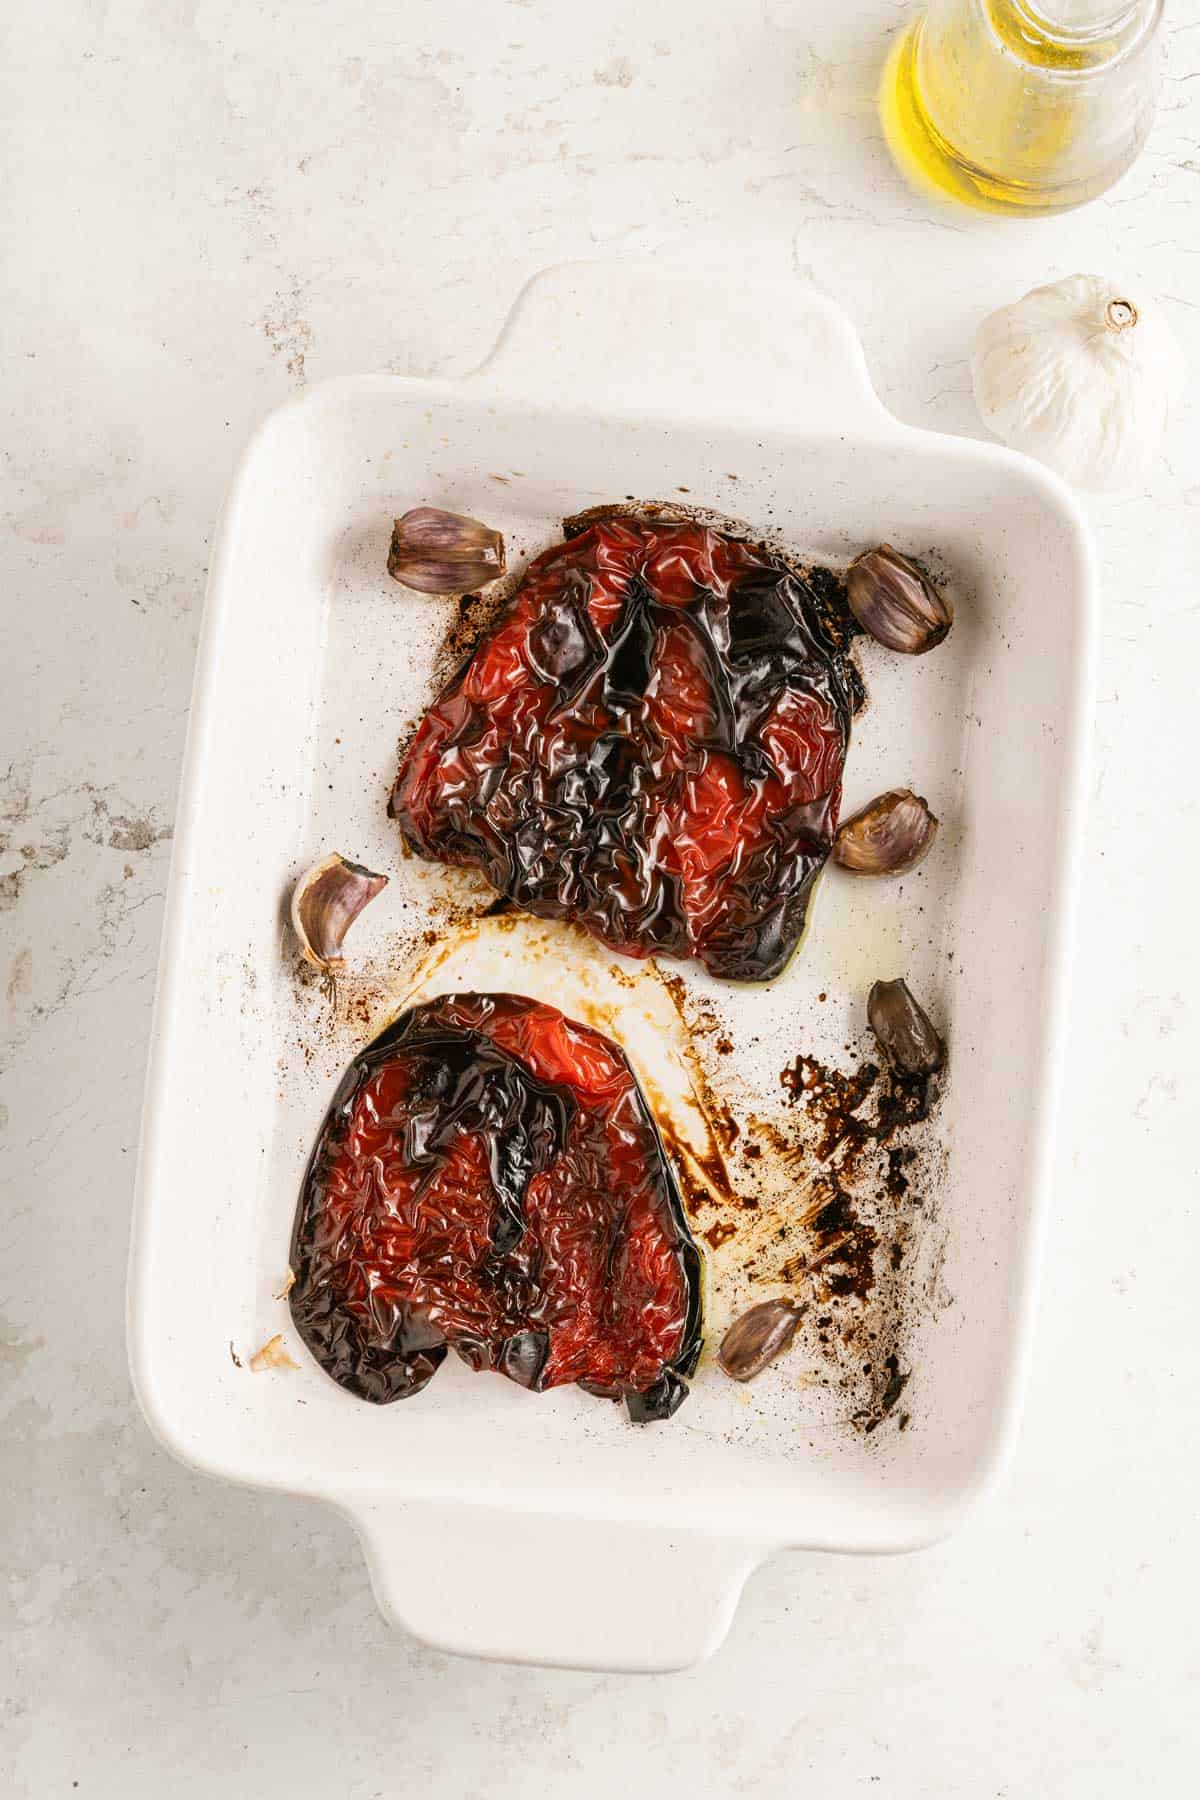 Roasted red peppers in a baking dish.